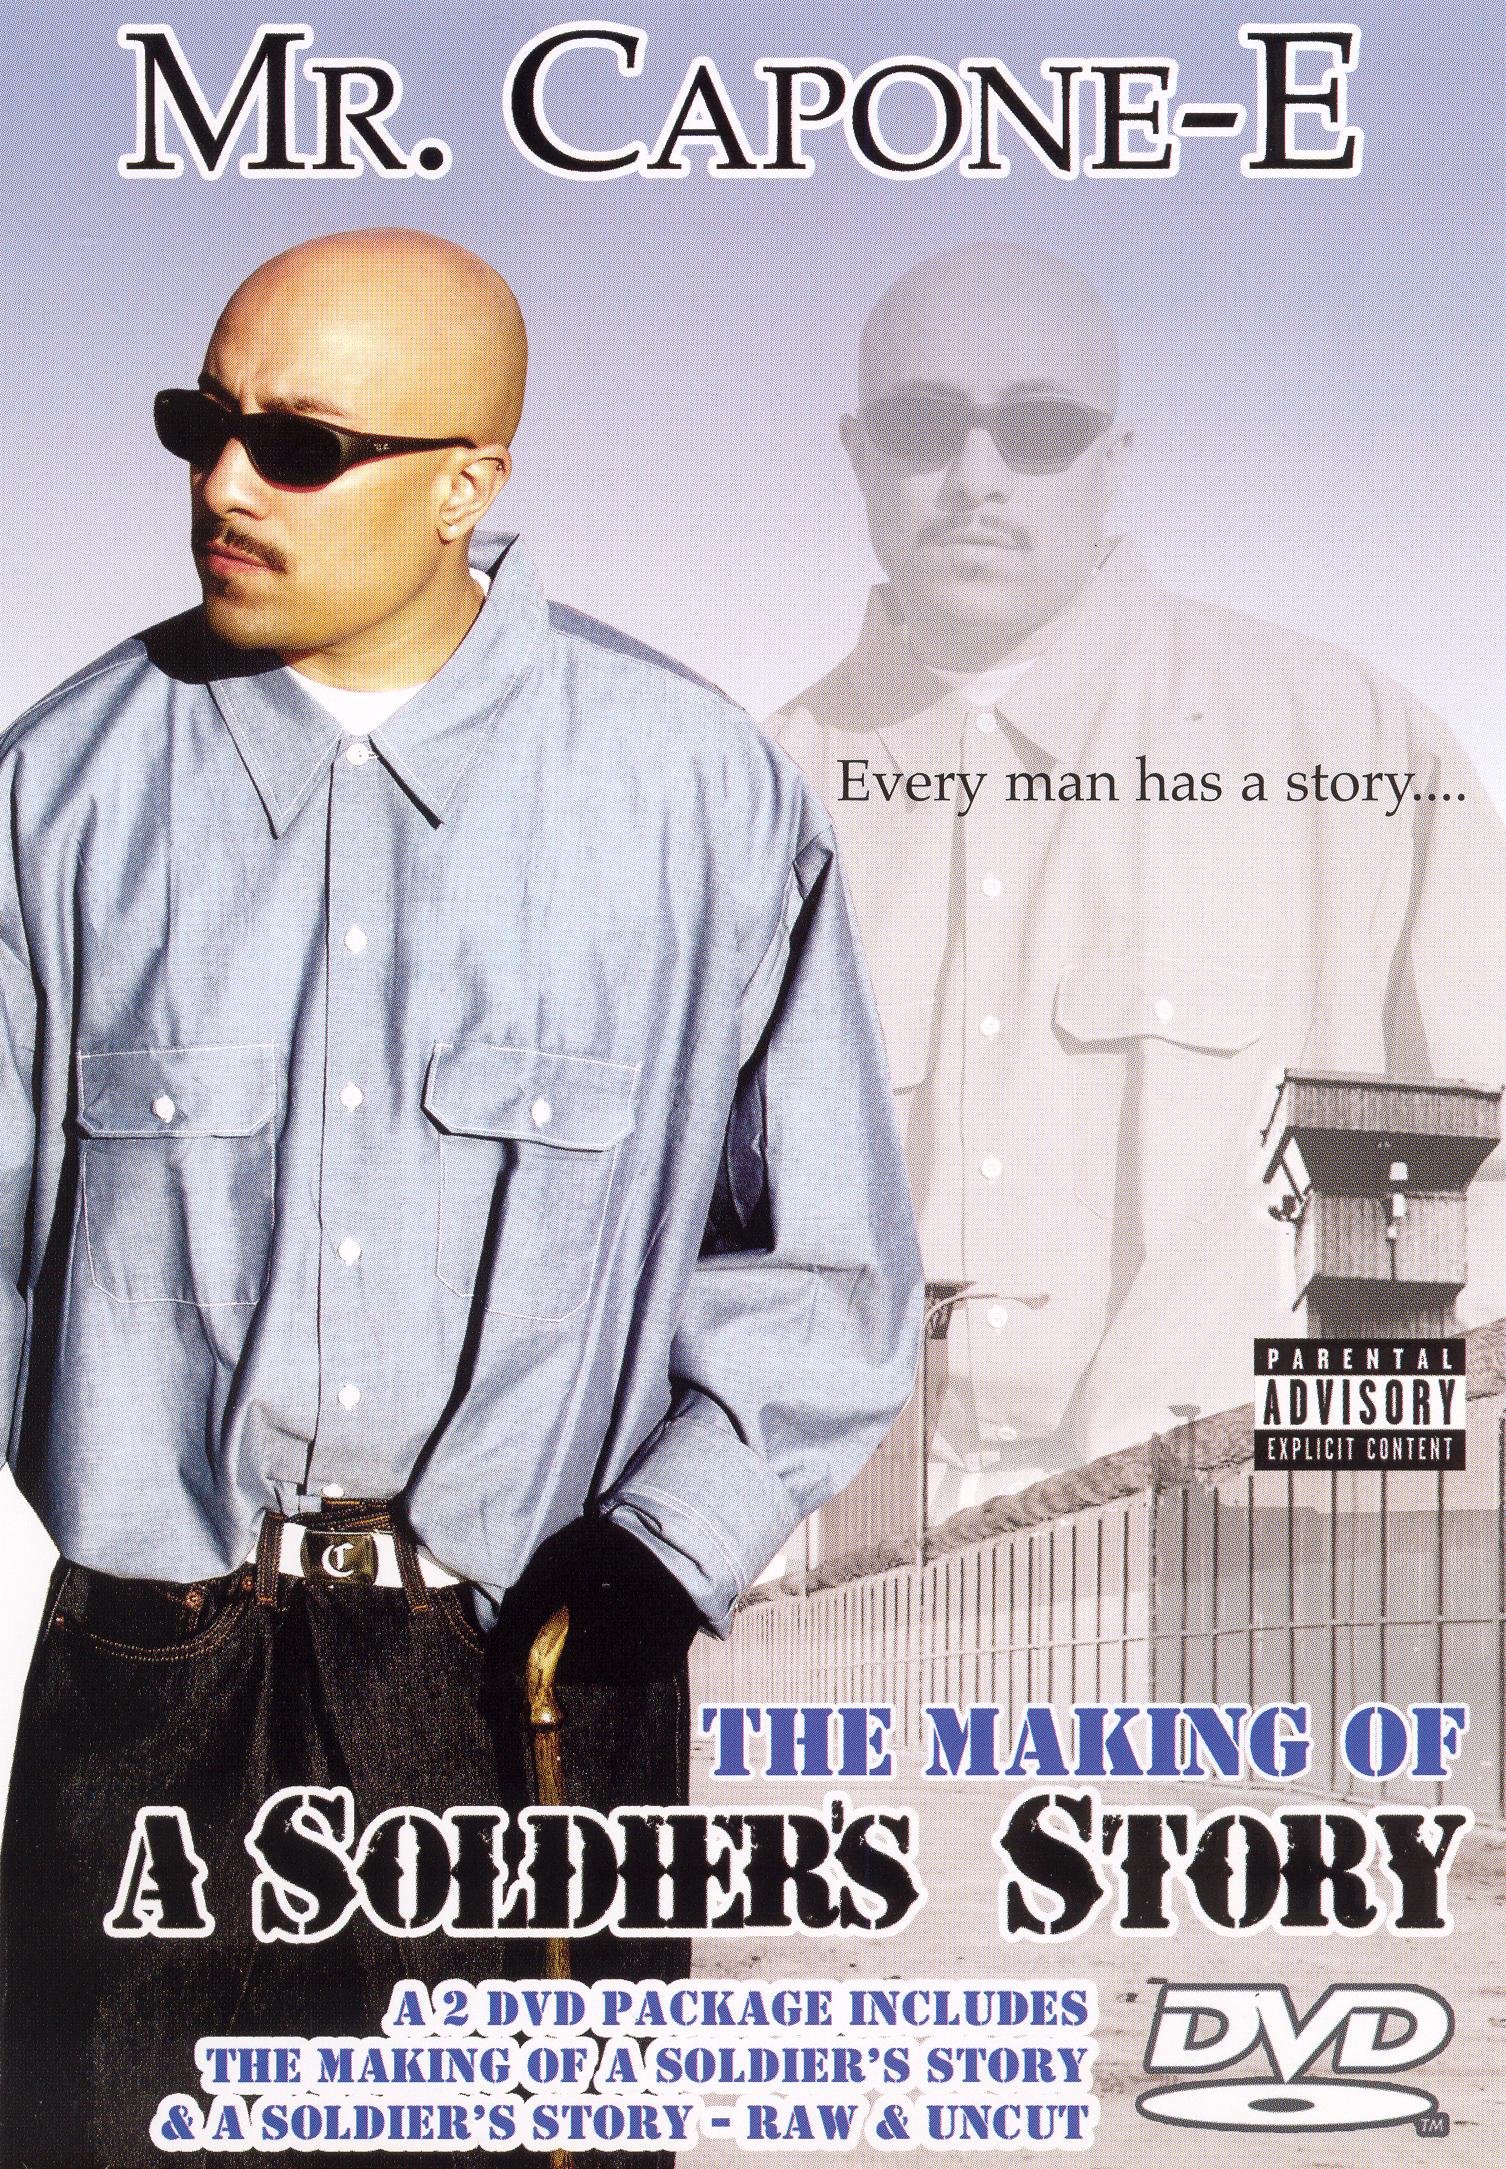 Best Buy: Mr. Capone-E: A Soldier's Story [DVD] [2005]